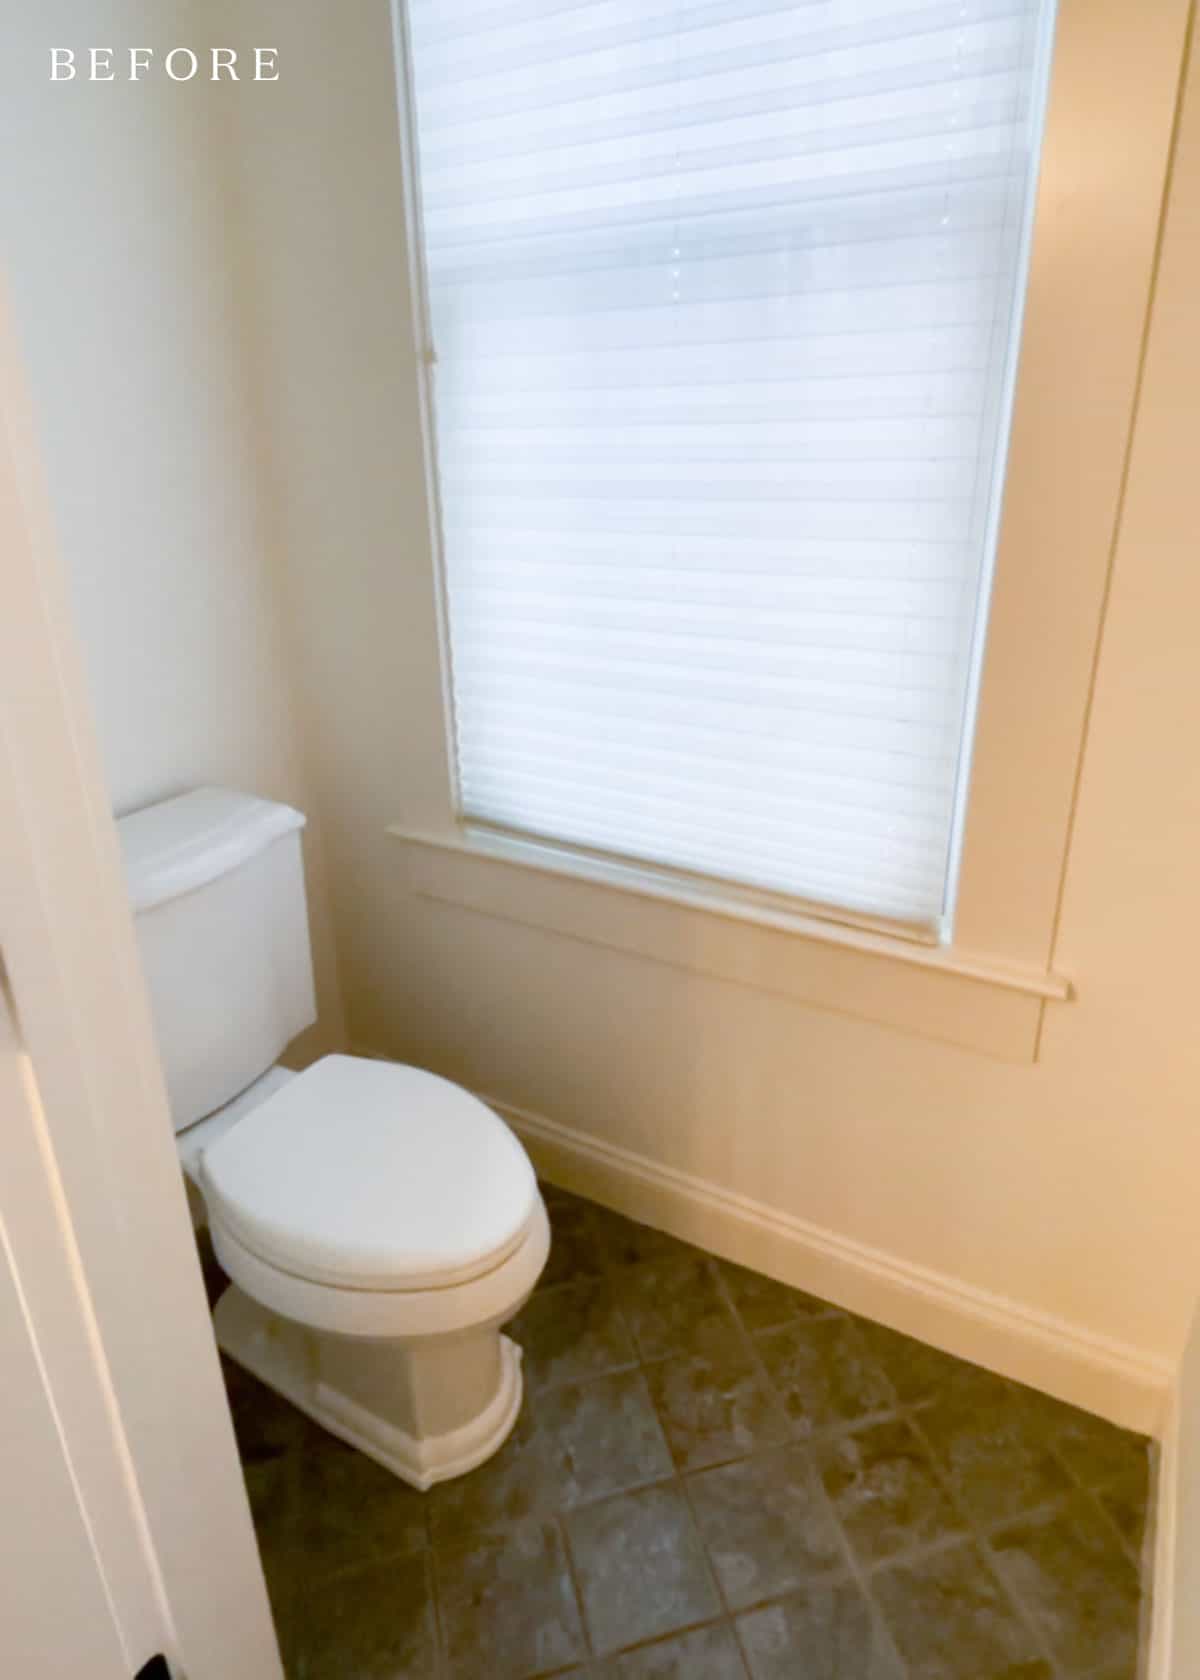 Water closet with large window and green tile